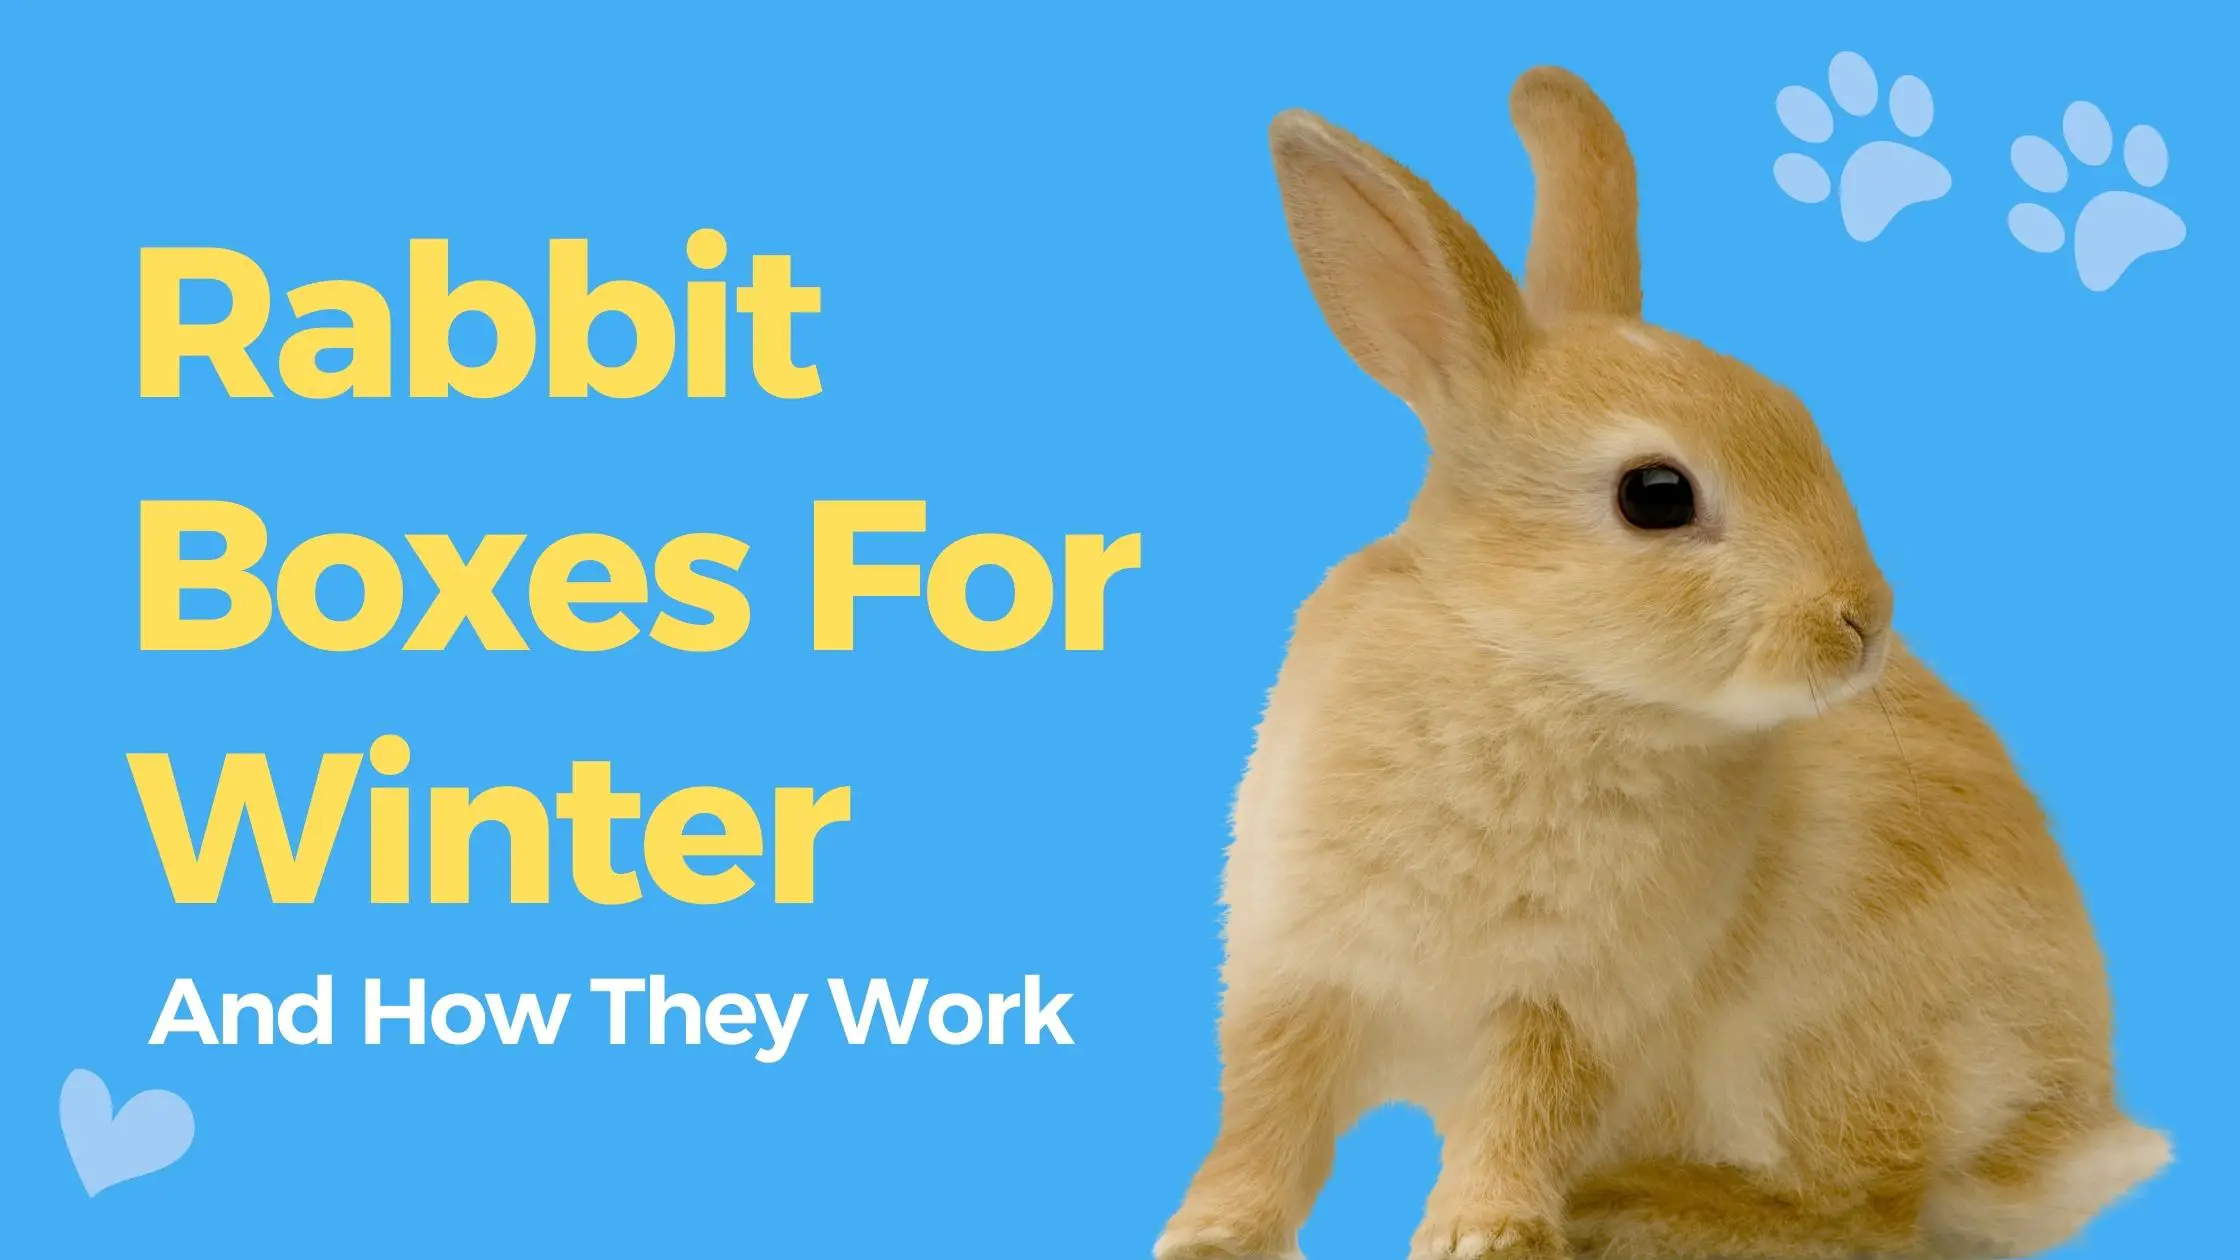 Rabbit Boxes For Winter And How They Work